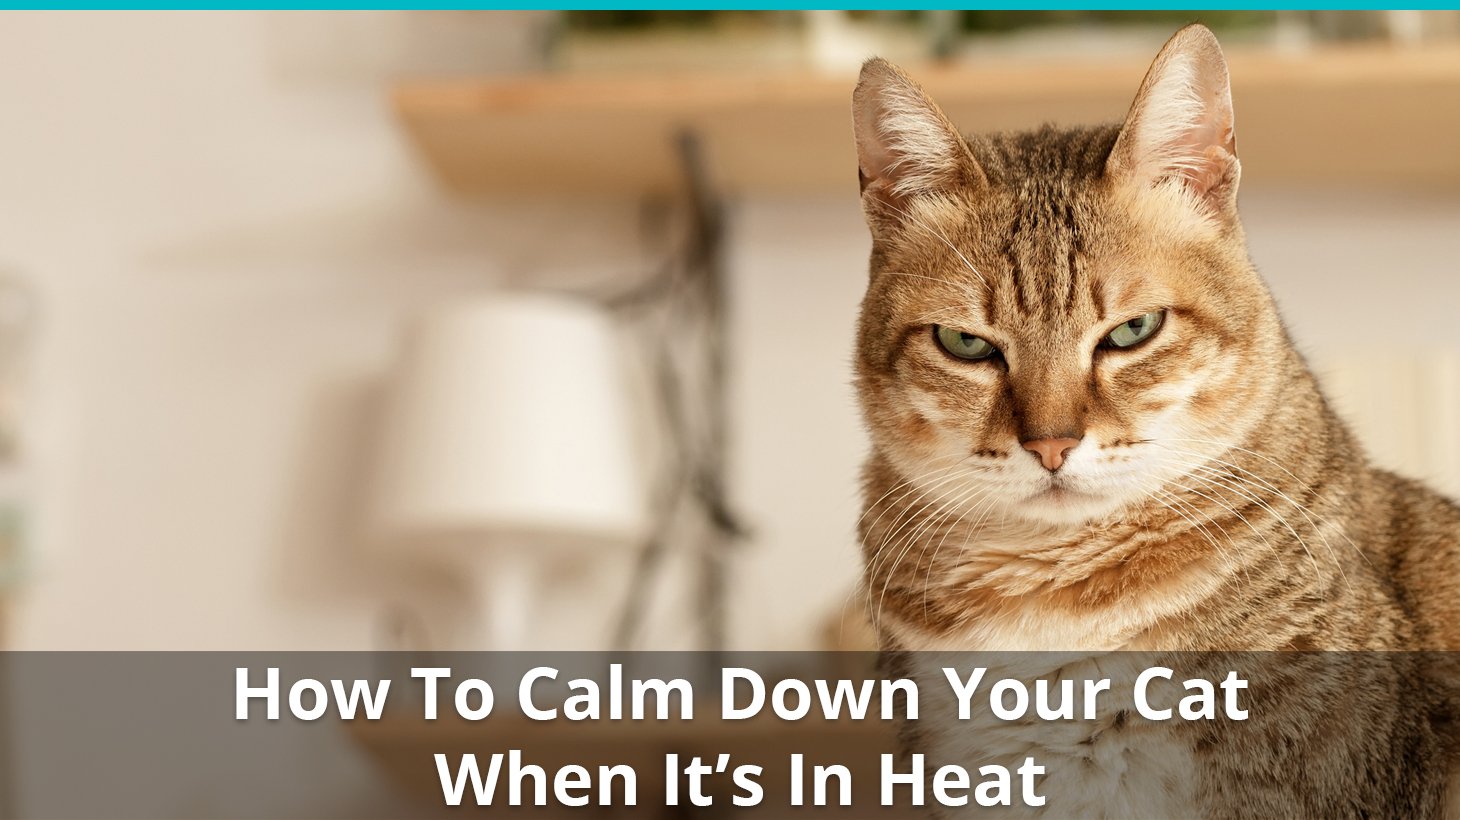 How To Help Calm Down A Cat In Heat Calming Remedies,Freeze Mushrooms